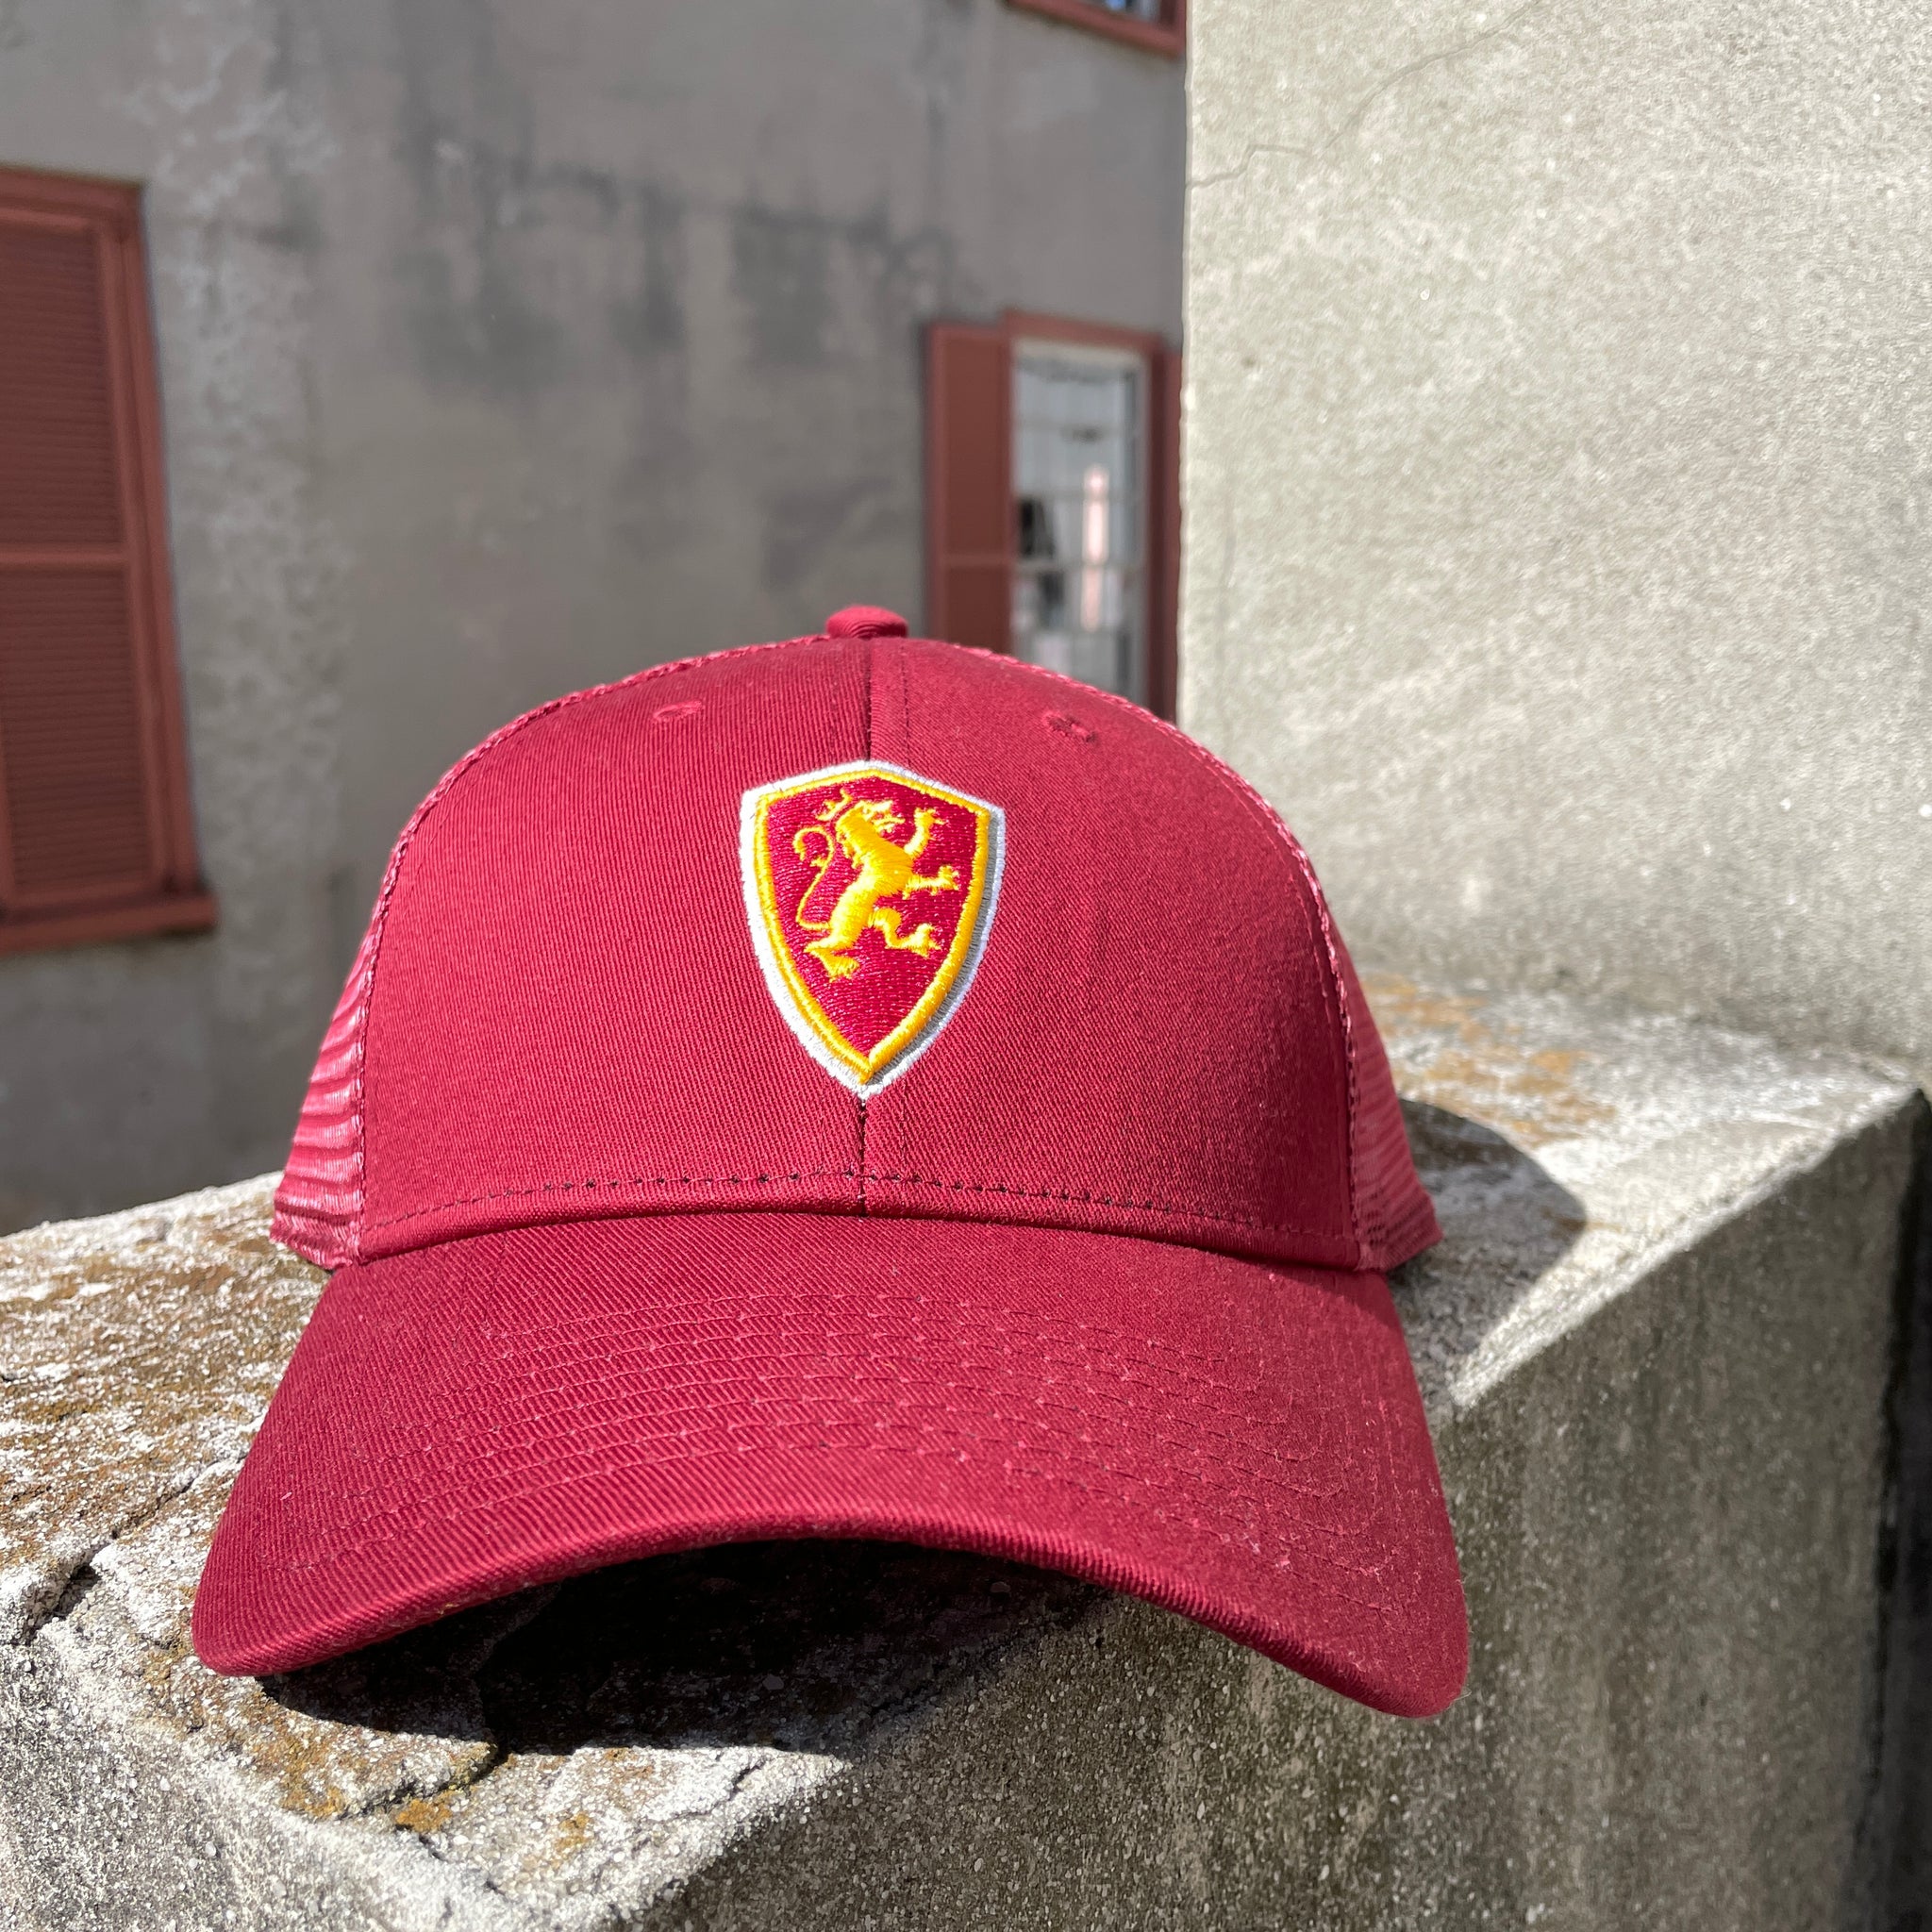 red hat with mesh back with Flagler shield logo in middle